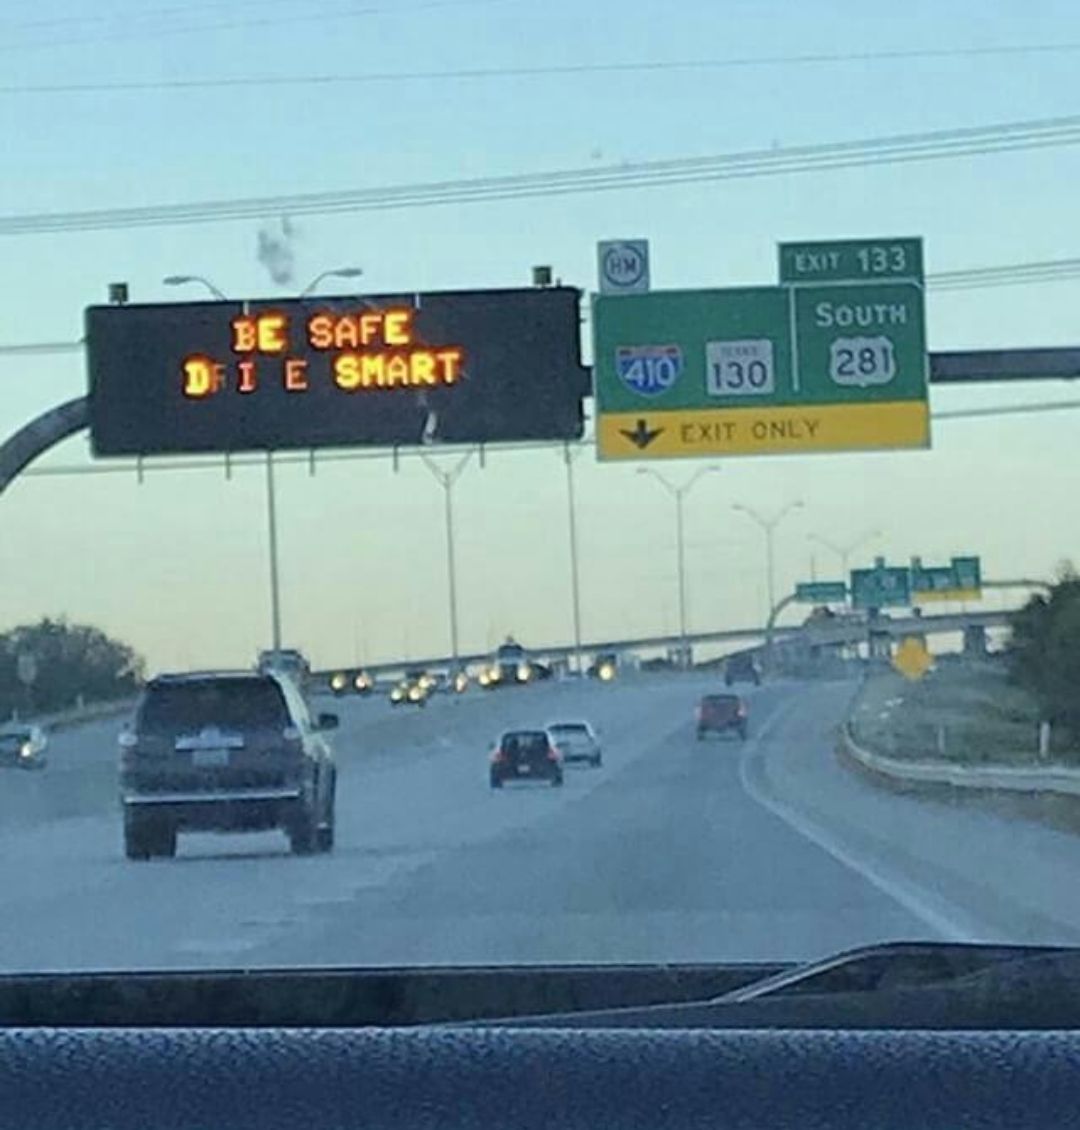 This is what my friend saw when she was driving home for the holidays.